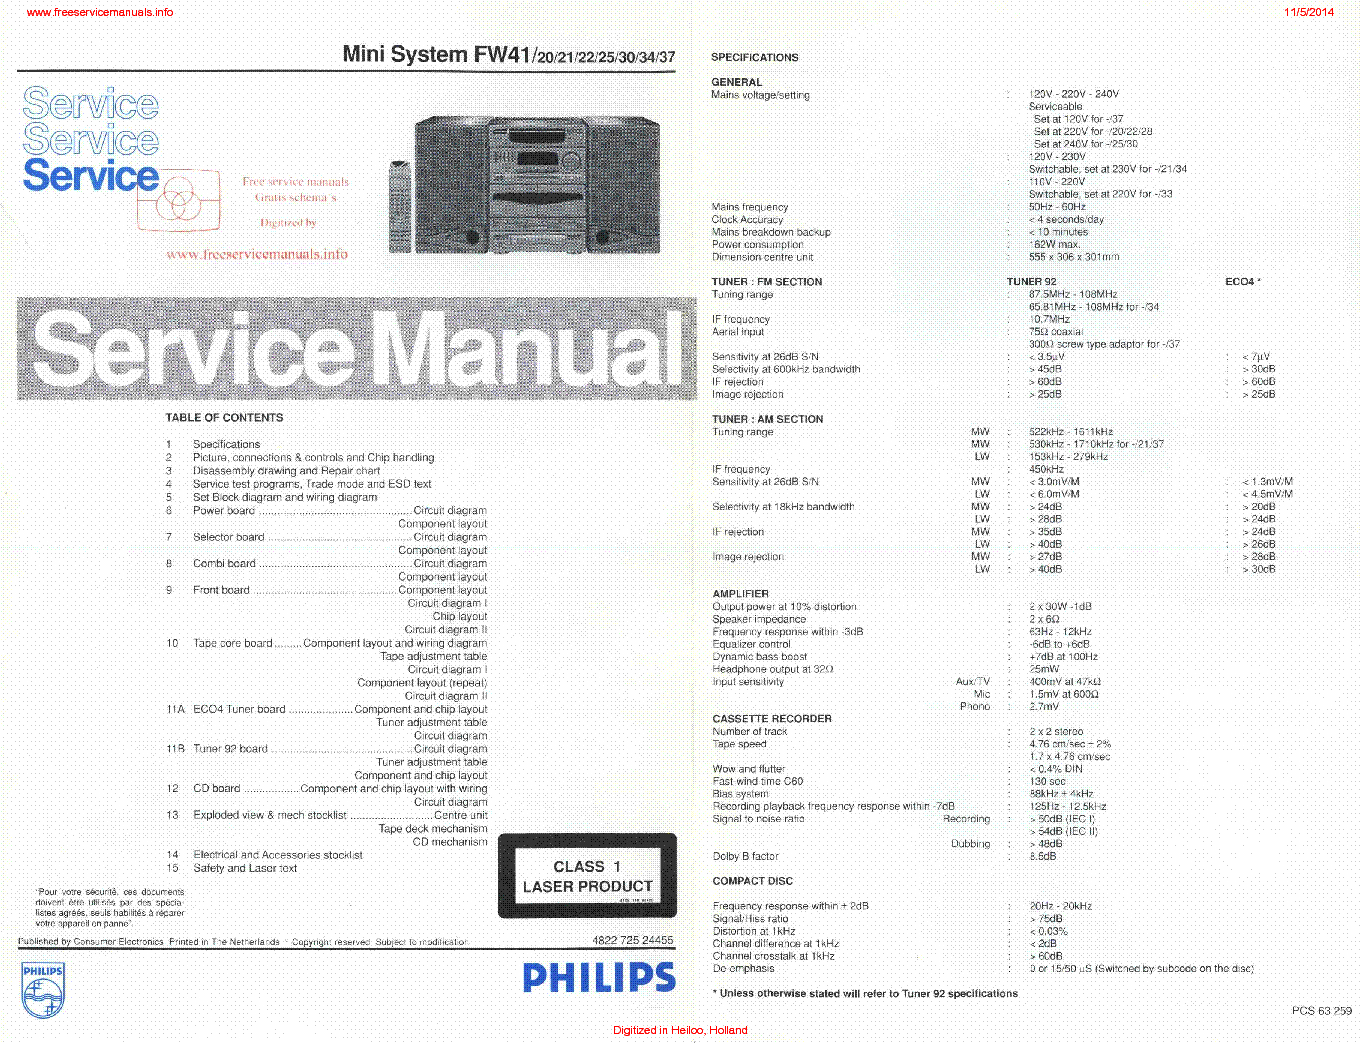 PHILIPS FW41 FW20 FW21 FW22 FW25 FW30 FW34 FW37 service manual (1st page)